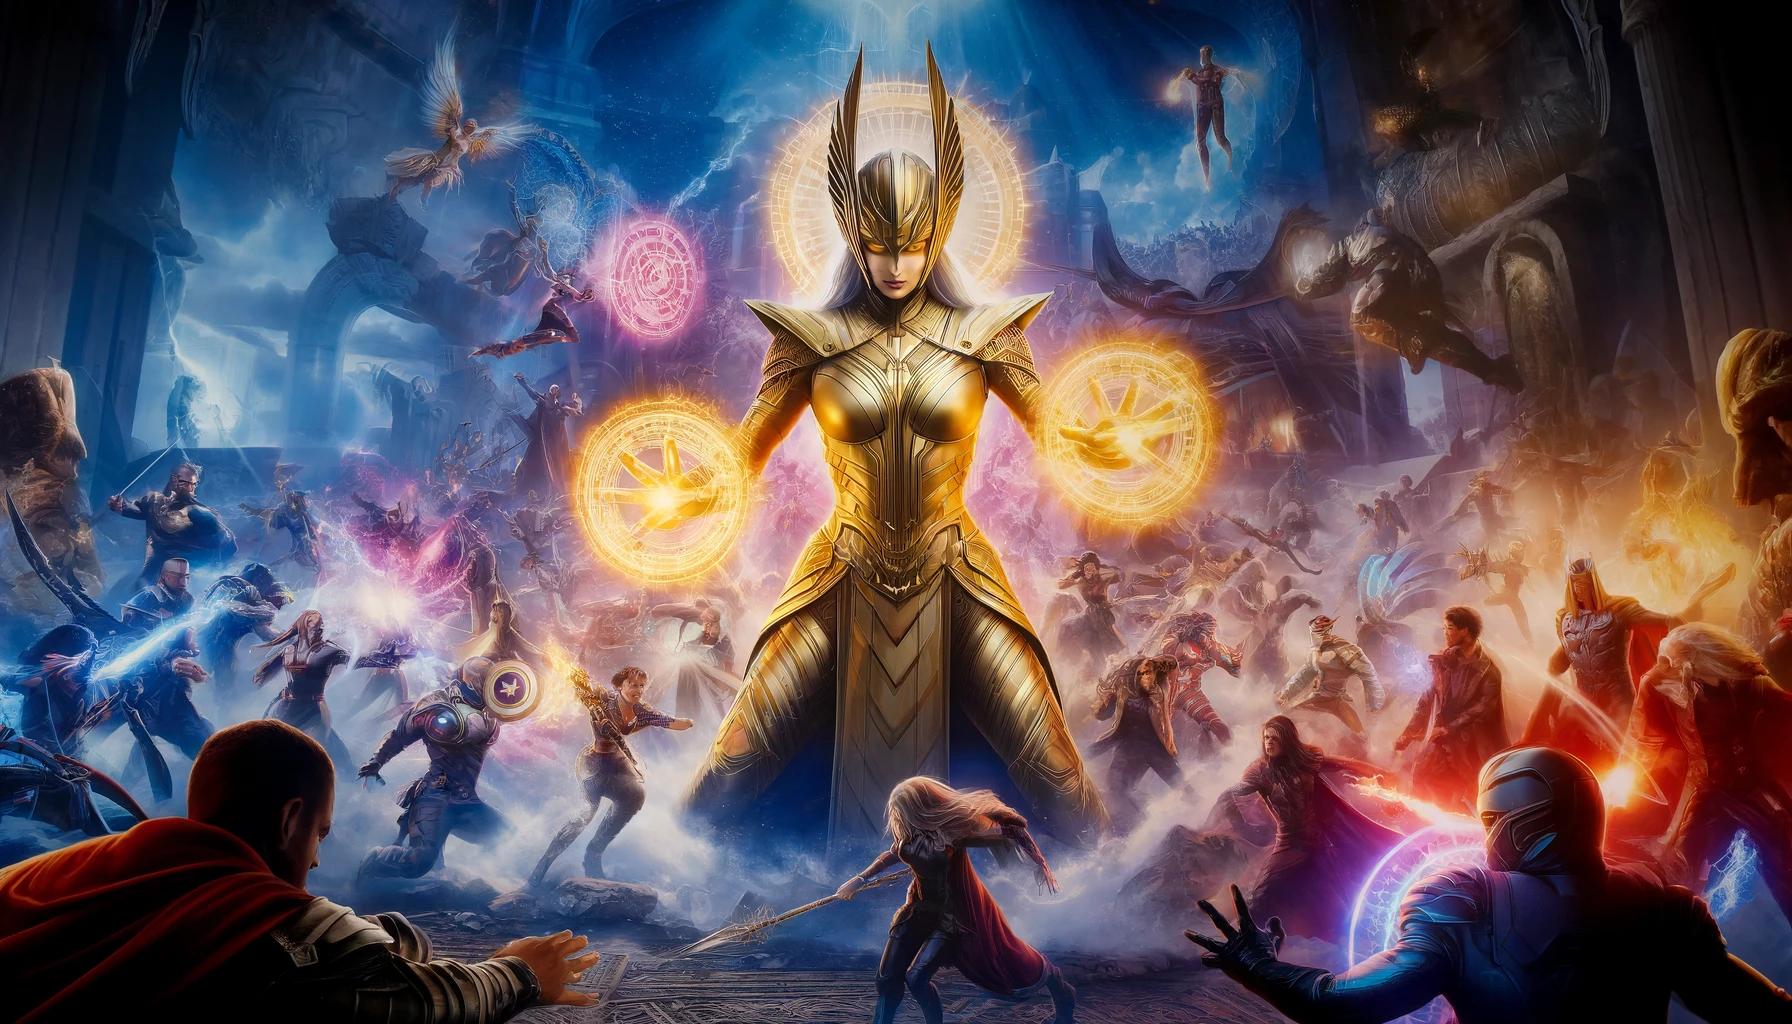 A highly realistic depiction of Thena in her golden armor, surrounded by magical energy and engaged in a fierce battle with various Marvel characters on a mystical battlefield.